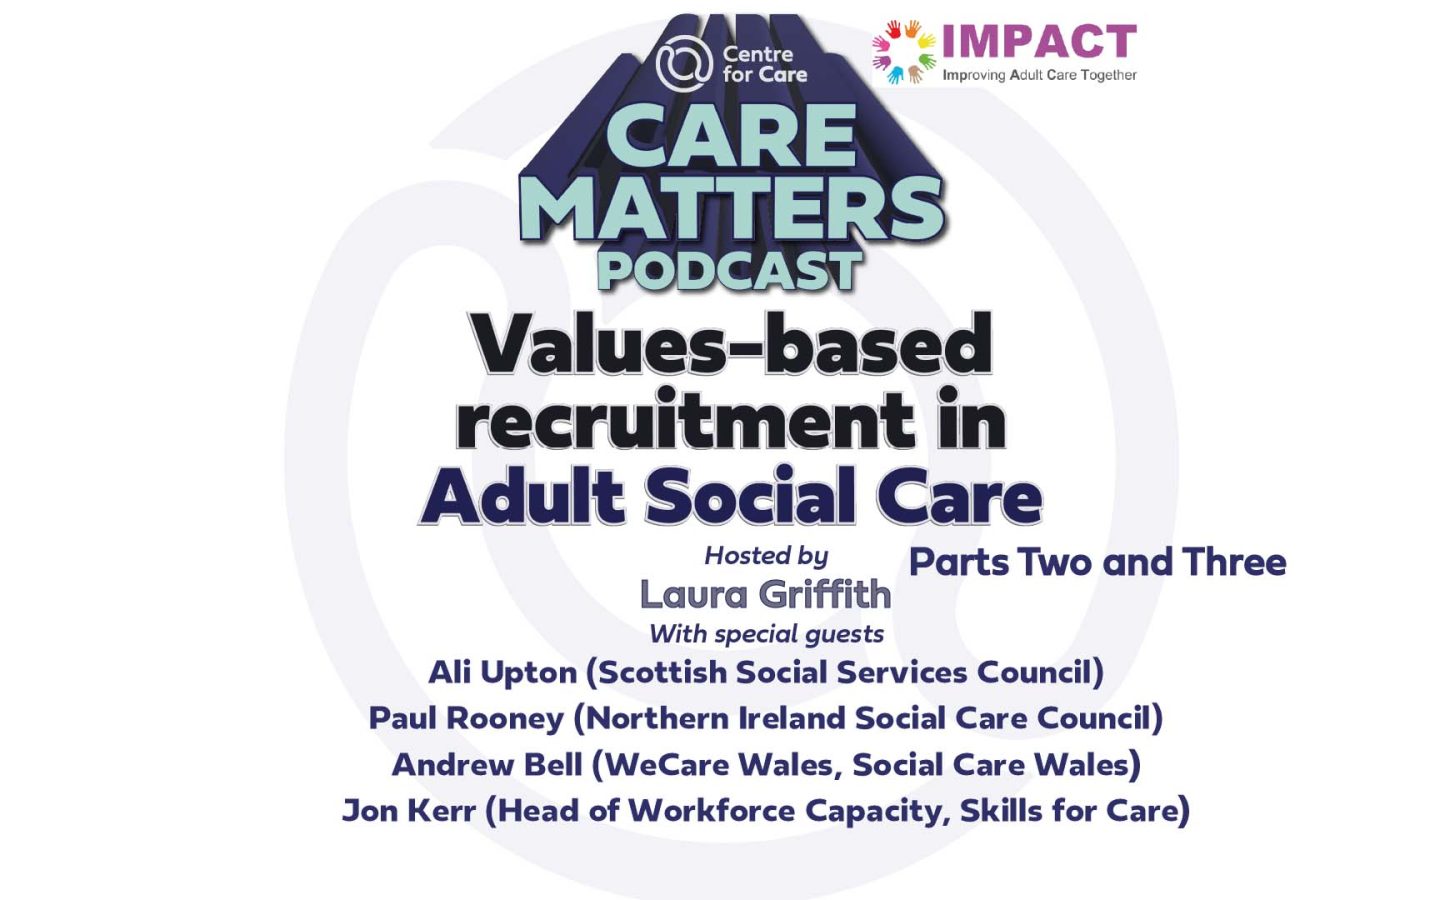 Text: CARE MATTERS PODCAST. 'Values-based recruitment in Adult Social Care Parts Two and Three Hosted by Laura Griffith with special guests Ali Upton (Scottish Social Services Council) Paul Rooney (Northern Ireland Social Care Council) Andrew Bell (WeCare Wales, Social Care Wales) Jon Kerr (Head of Workforce Capacity, Skills for Care)